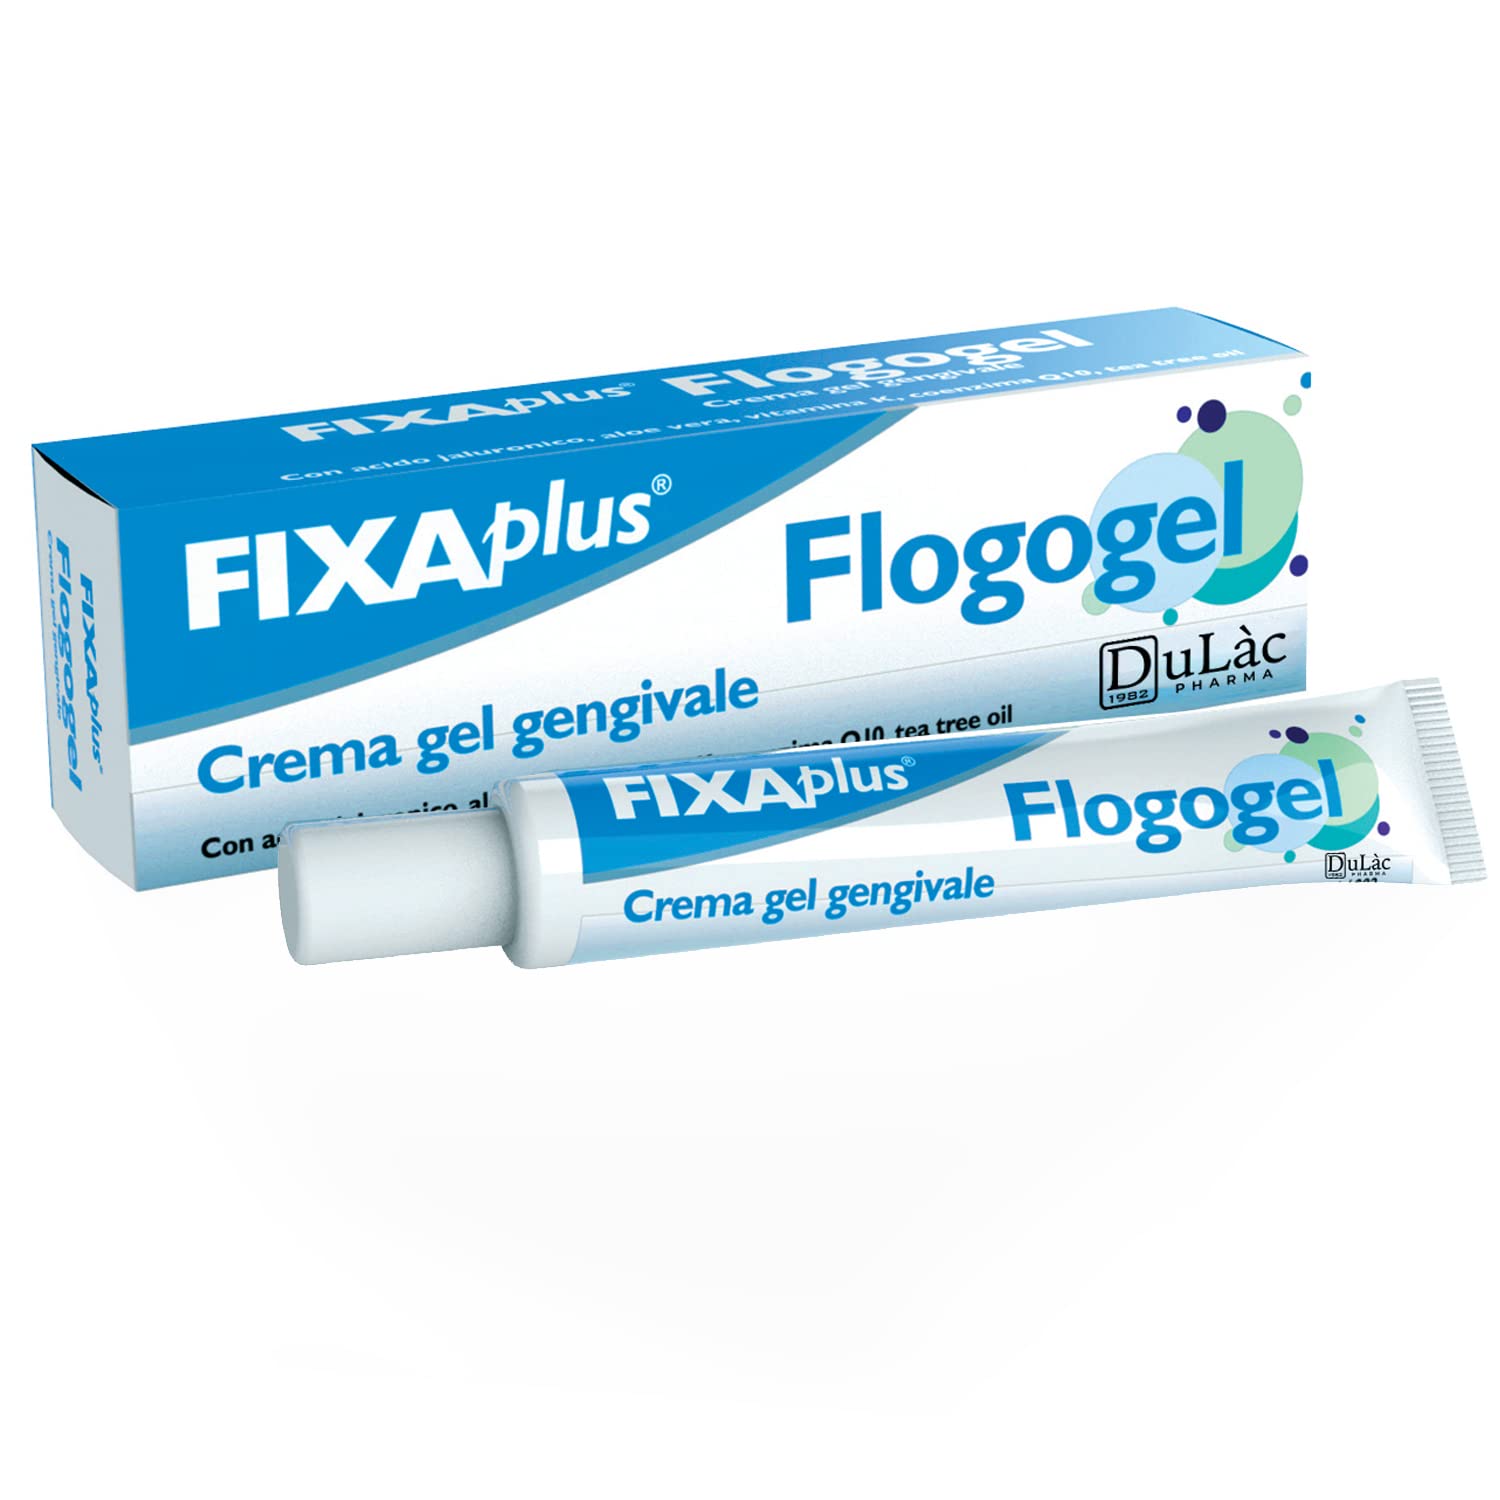 Gum Gel Dulàc Flogogel, Oral Gel-Cream with Hyaluronic Acid and Aloe Vera for Mouth Ulcer, Receding Gum Treatment, Cold Sore, Irritated Gums, Periodontitis and Other Oral Mucosa Problems